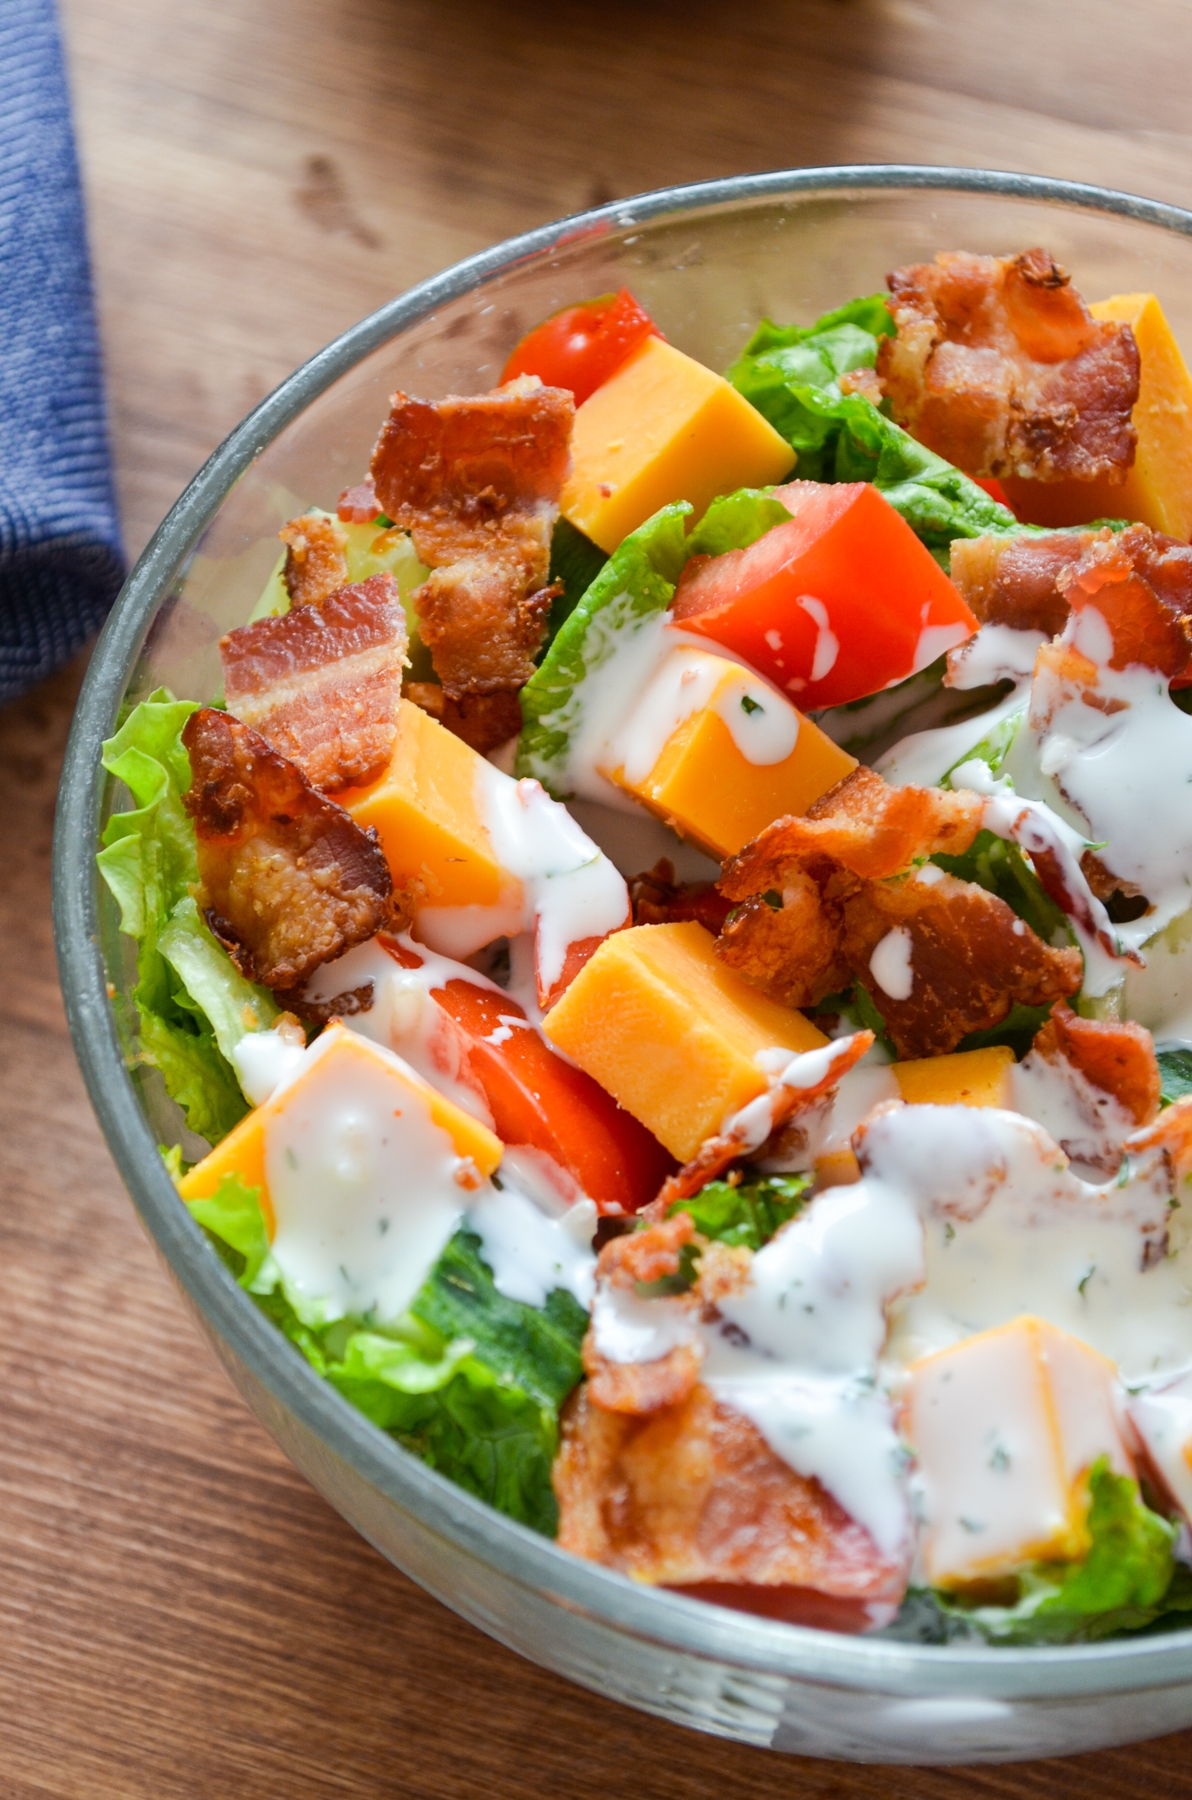 salad with chunks of tomatoes, bacon, cheese and lettuce with a creamy dressing.